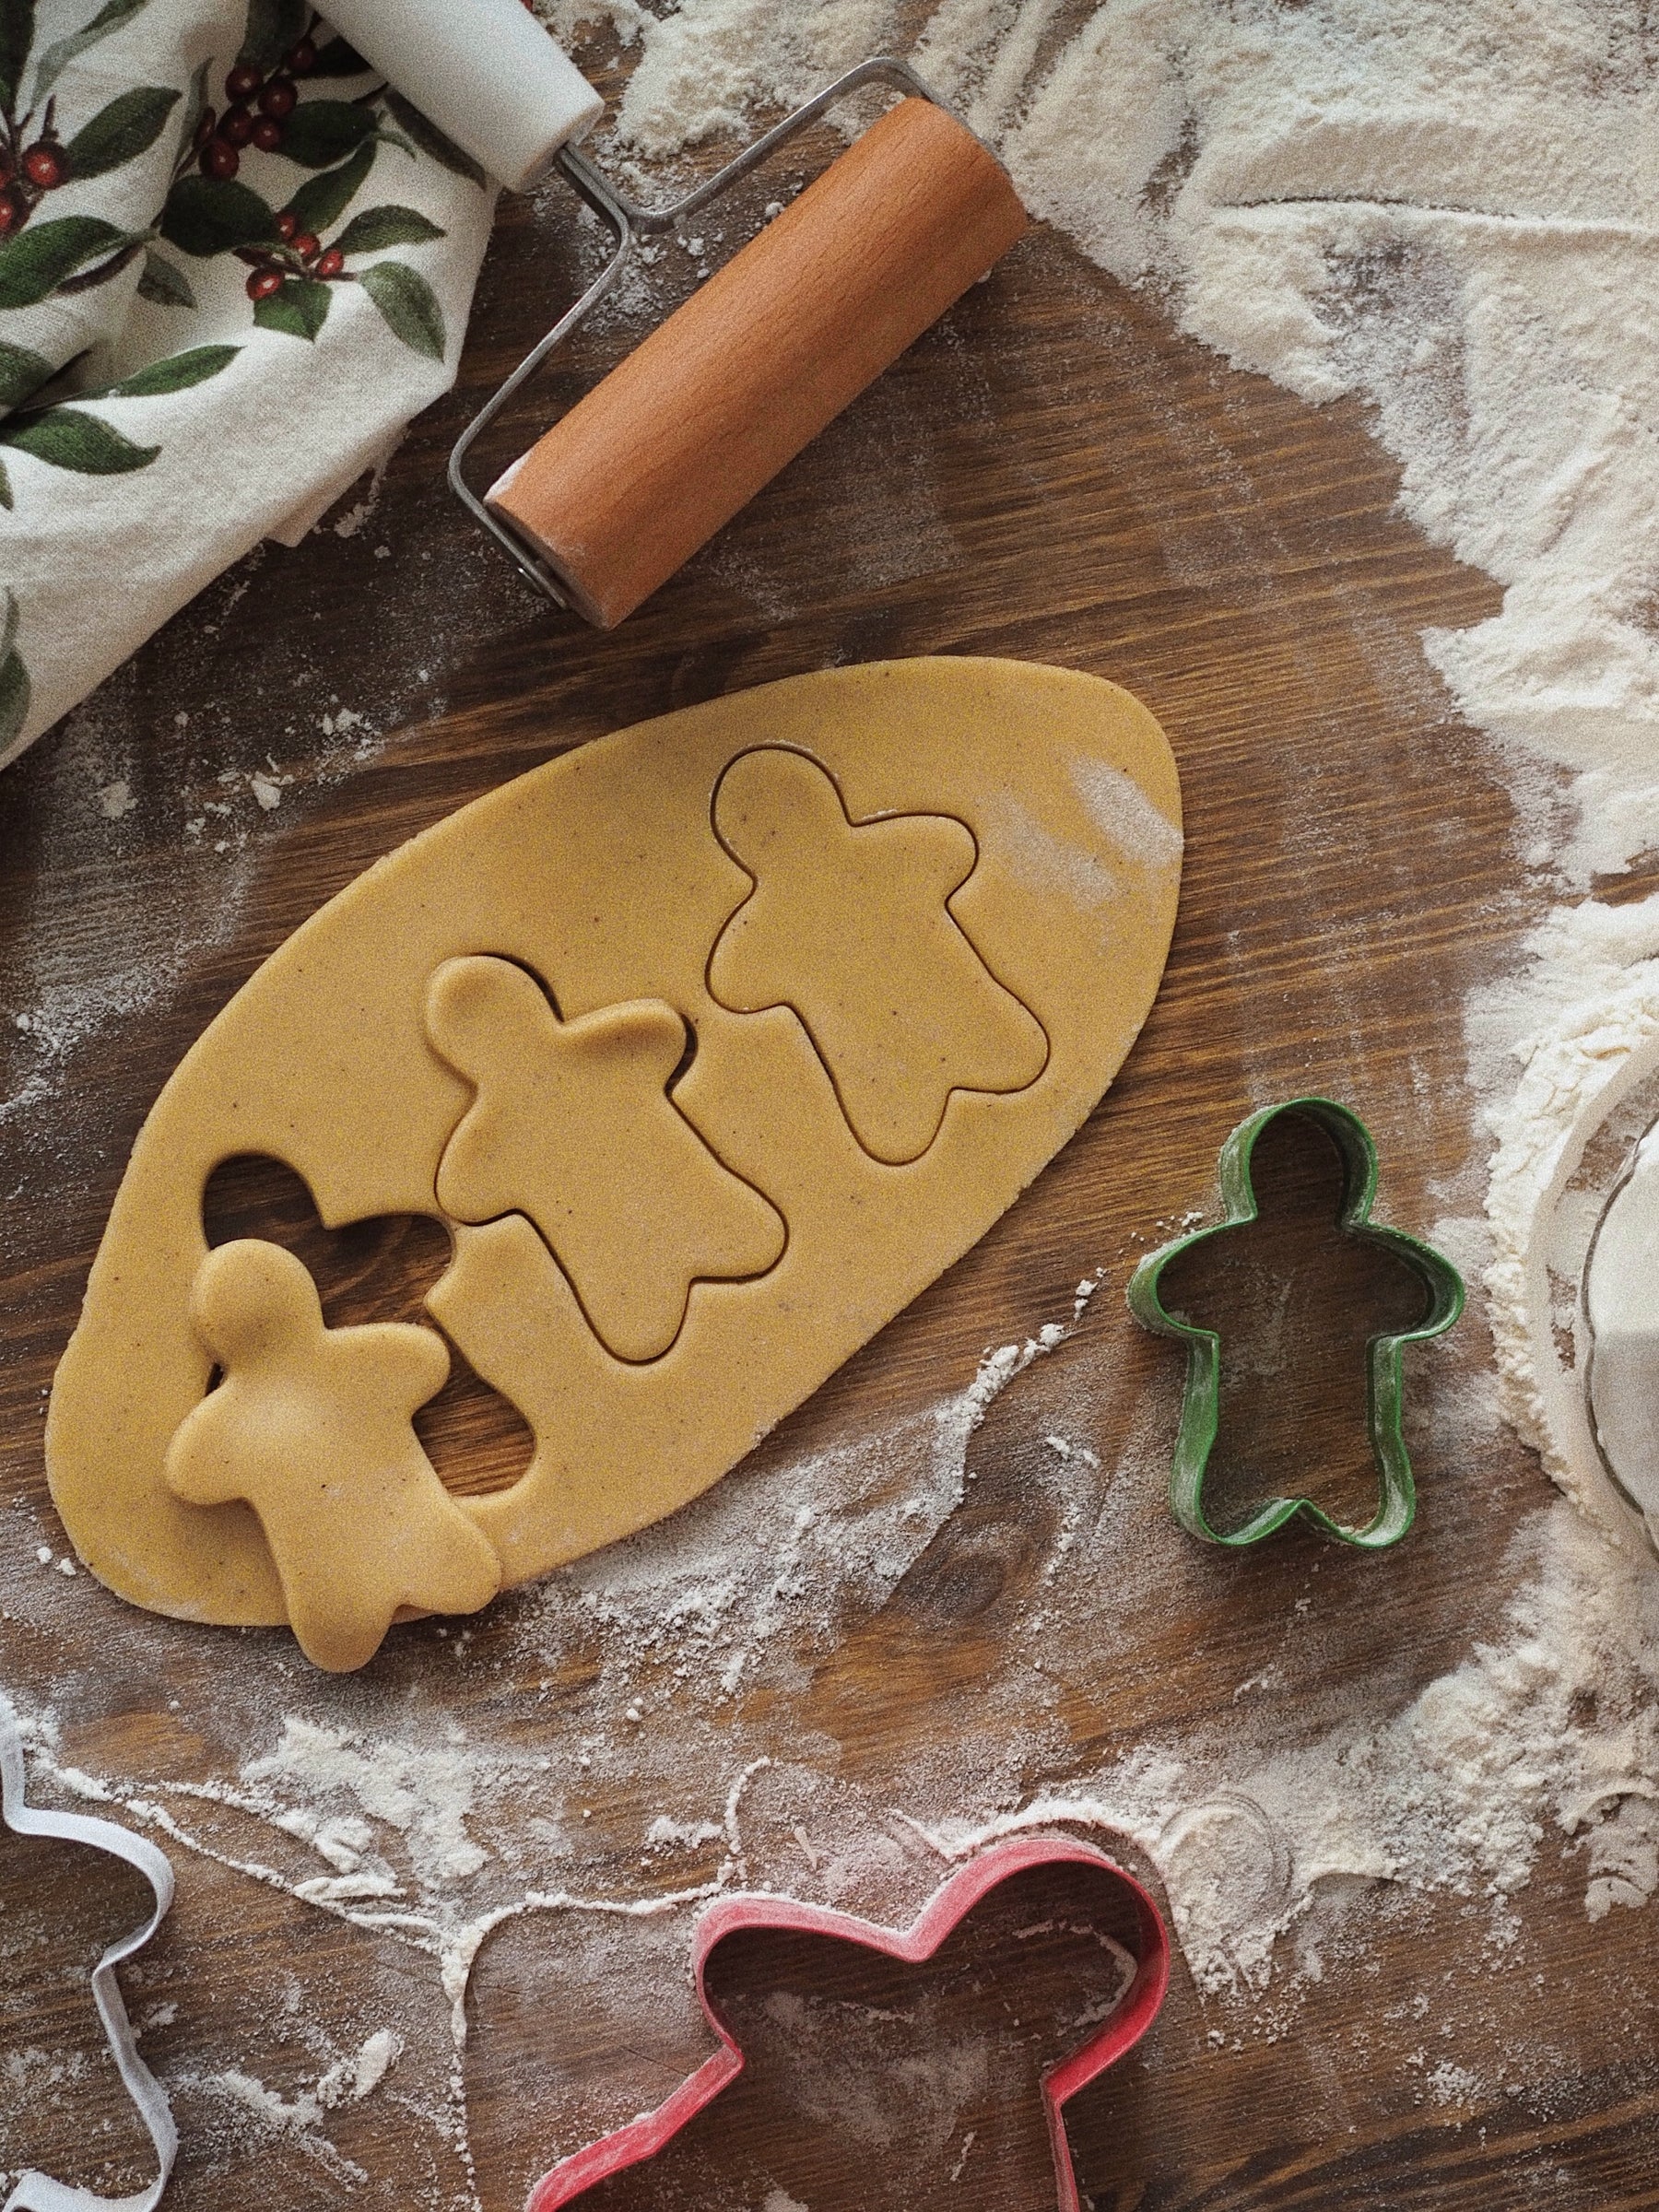 There is no “cookie cutter” approach to holiness.